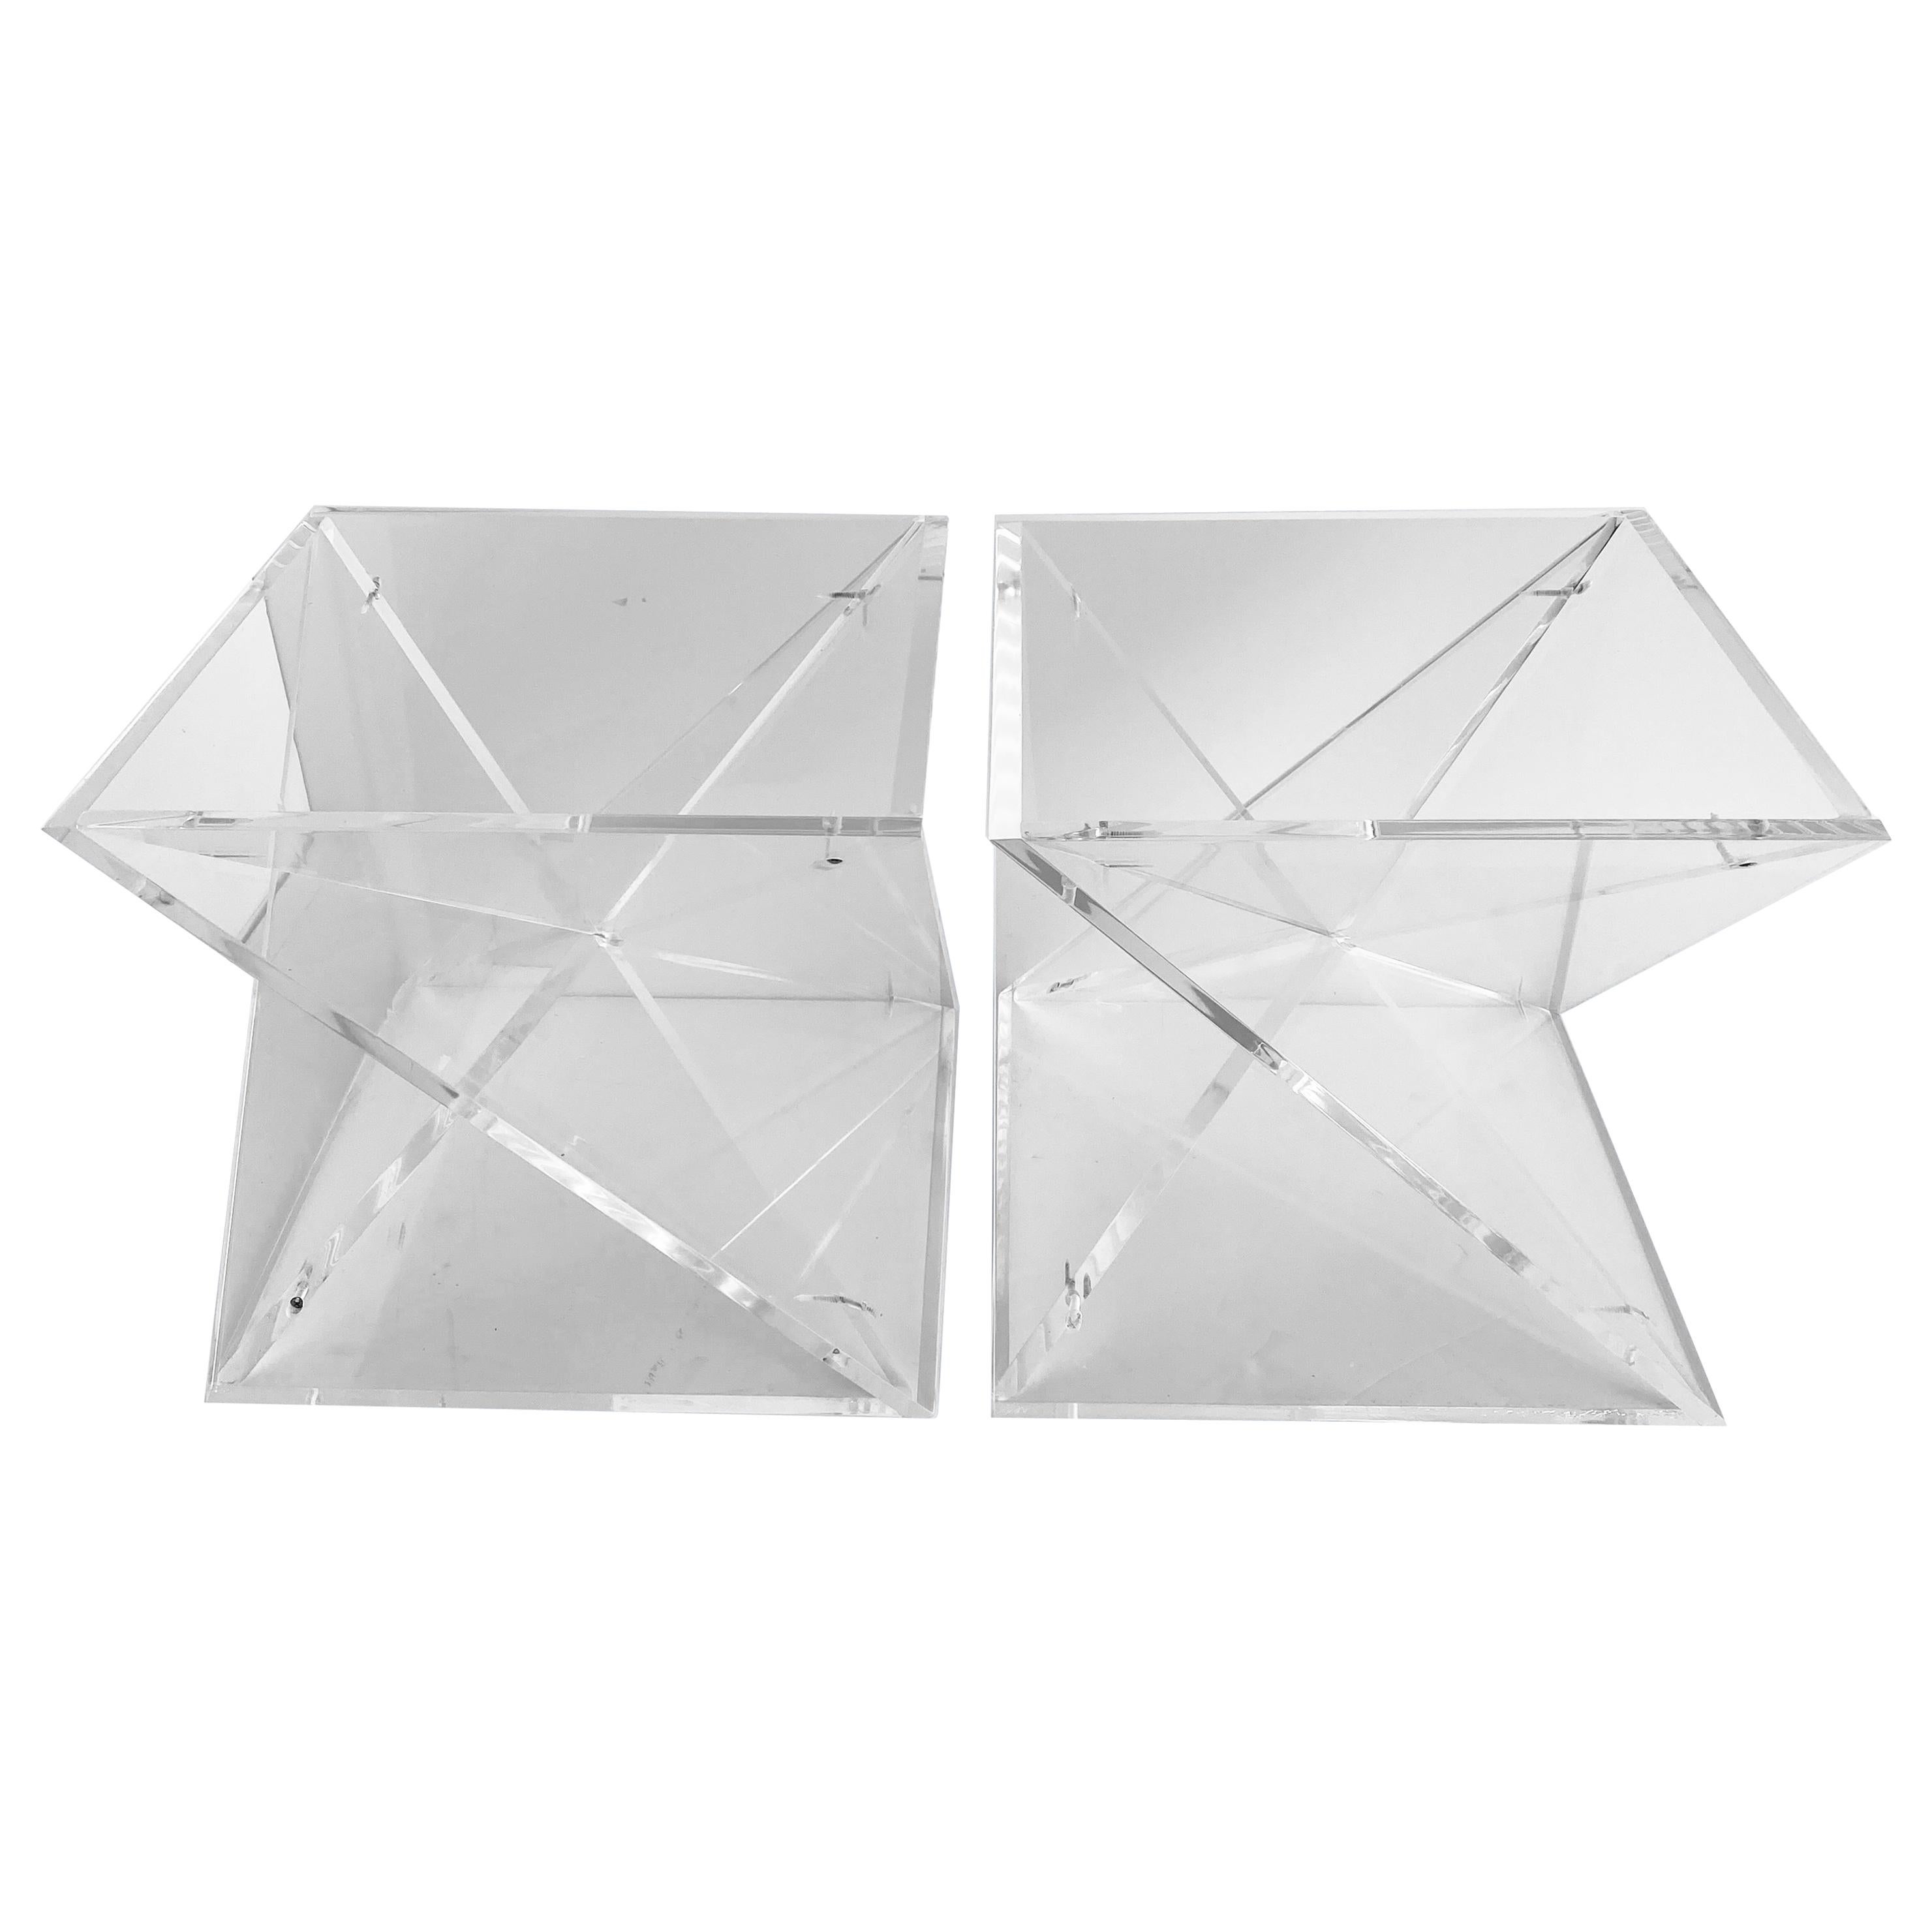 Pair of Small Square Mid-Century Modern Lucite Side Table Bases